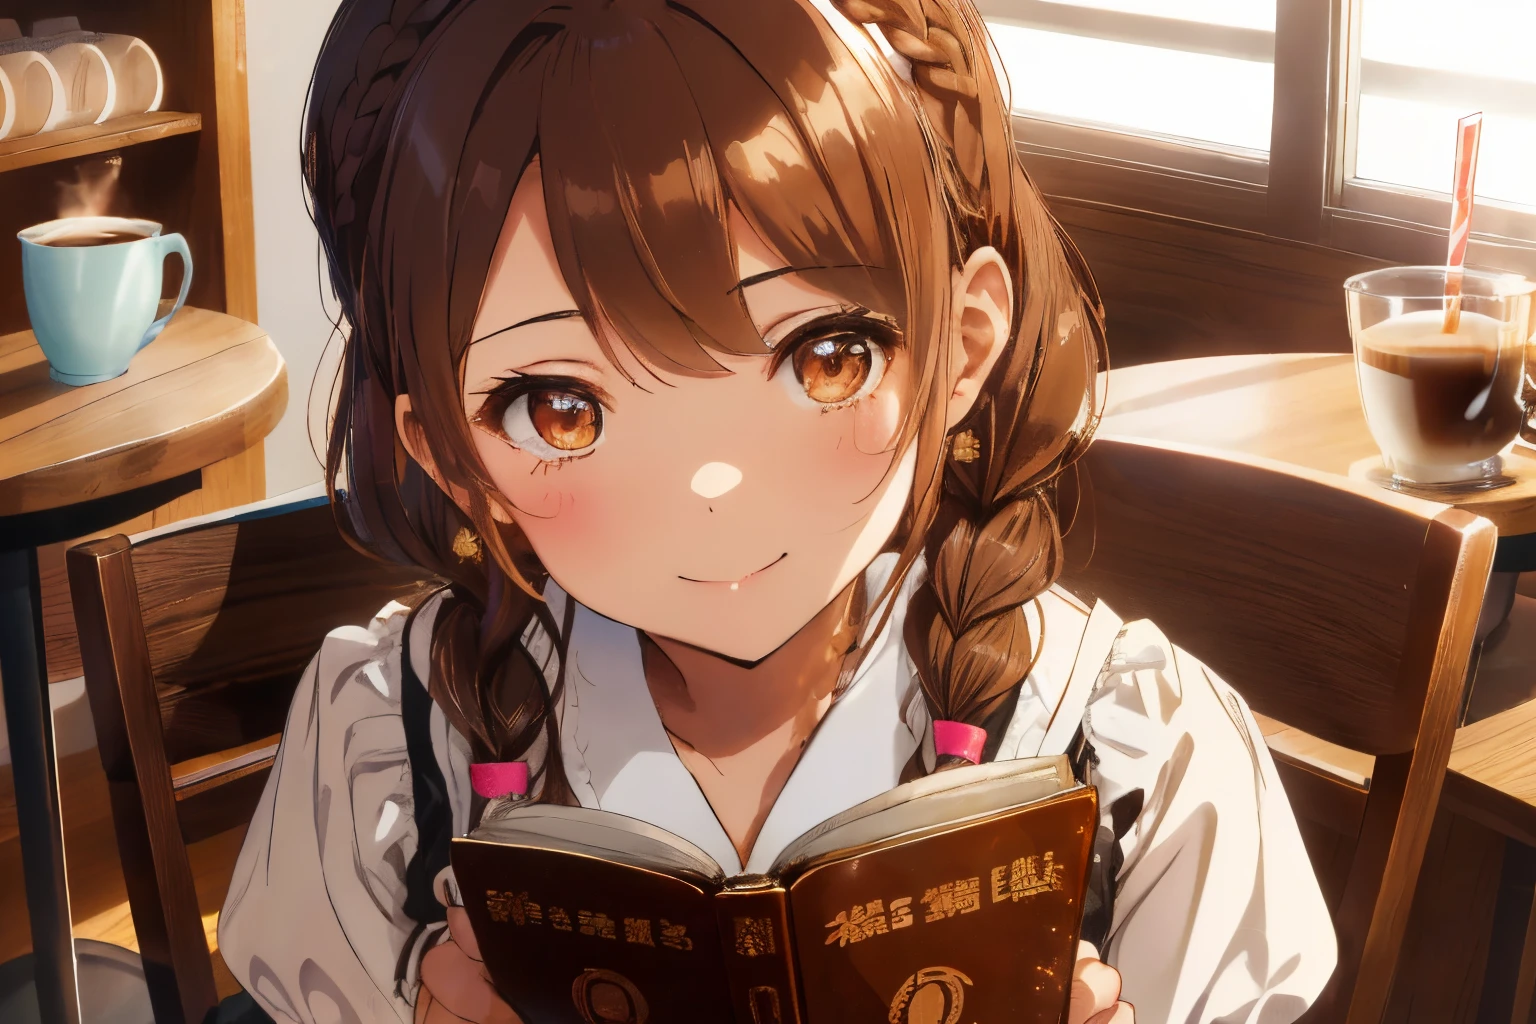 fluffy hair,Brown hair,(downward twintails),((Braided shorthair)),Slightly red tide,((Brown eyes)),(A coffee shop with a Showa retro atmosphere),((siphon or coffee cup)),(A counter with a warm and modern atmosphere),((Meiji period～Showa era waitress)),(maid clothes),(White headdress),((Sit in a chair and read a book)),Staring at me,(Pin Heel Shoes),Smile with a kind face,((close up)),(((close up of face))),